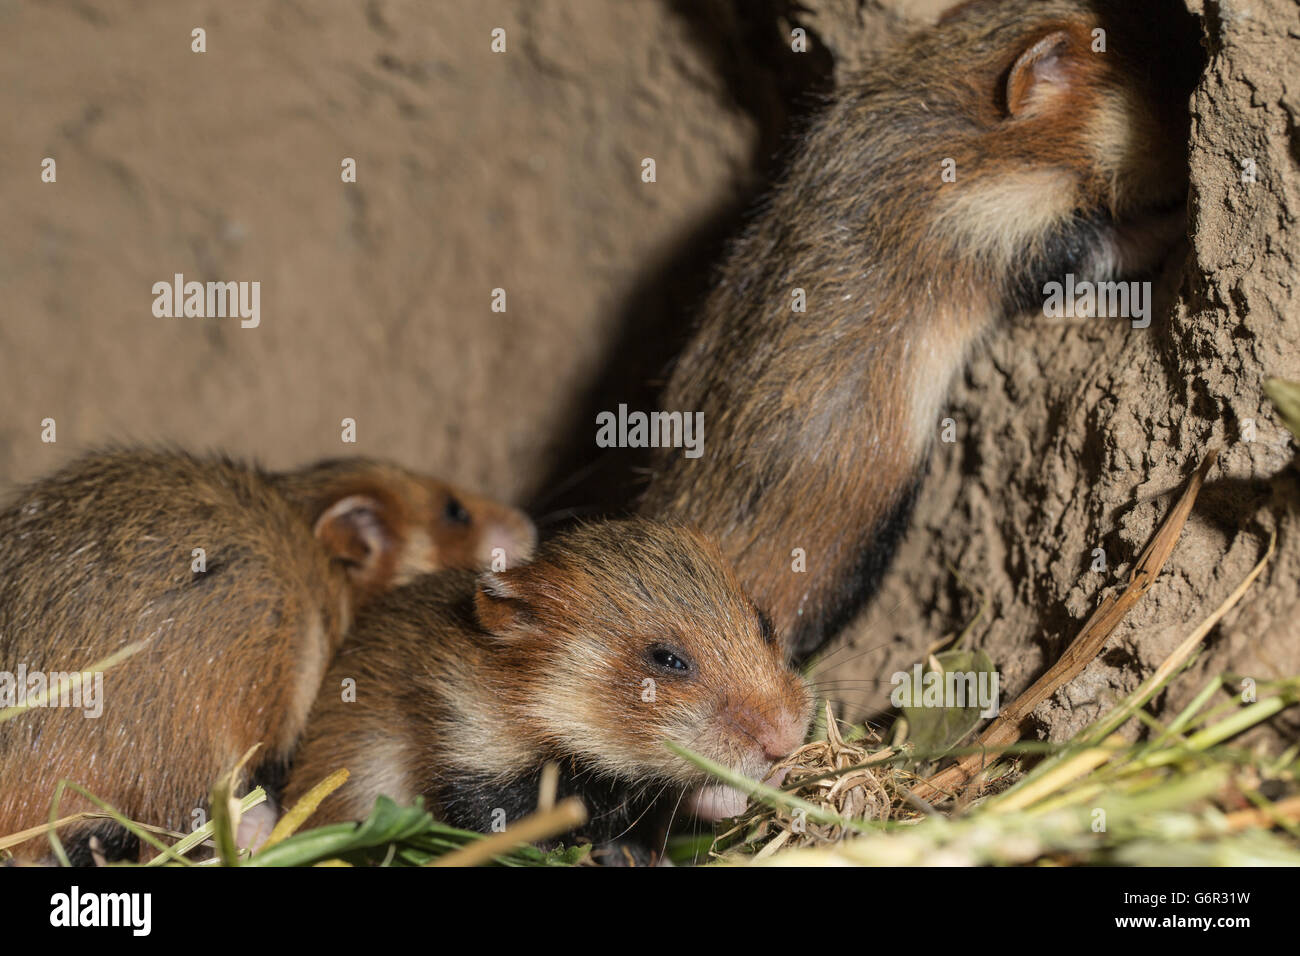 Grand hamster, Youngs, 17 jours, au terrier, europe, (Cricetus cricetus) Banque D'Images